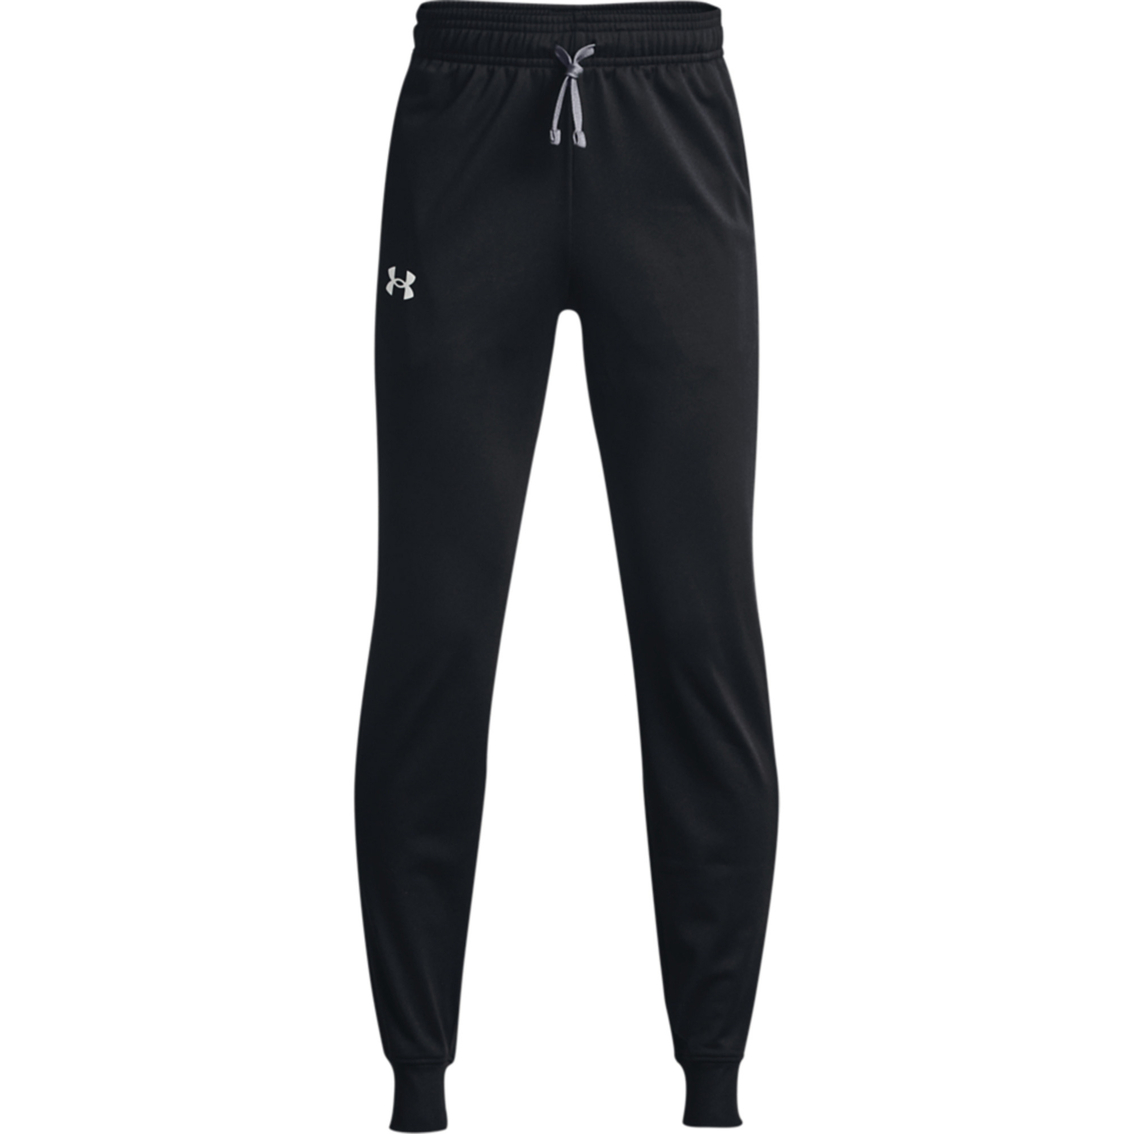 Under Armour Boys Black And Gray Brawler 2.0 Tapered Pants | Boys 8-20 ...